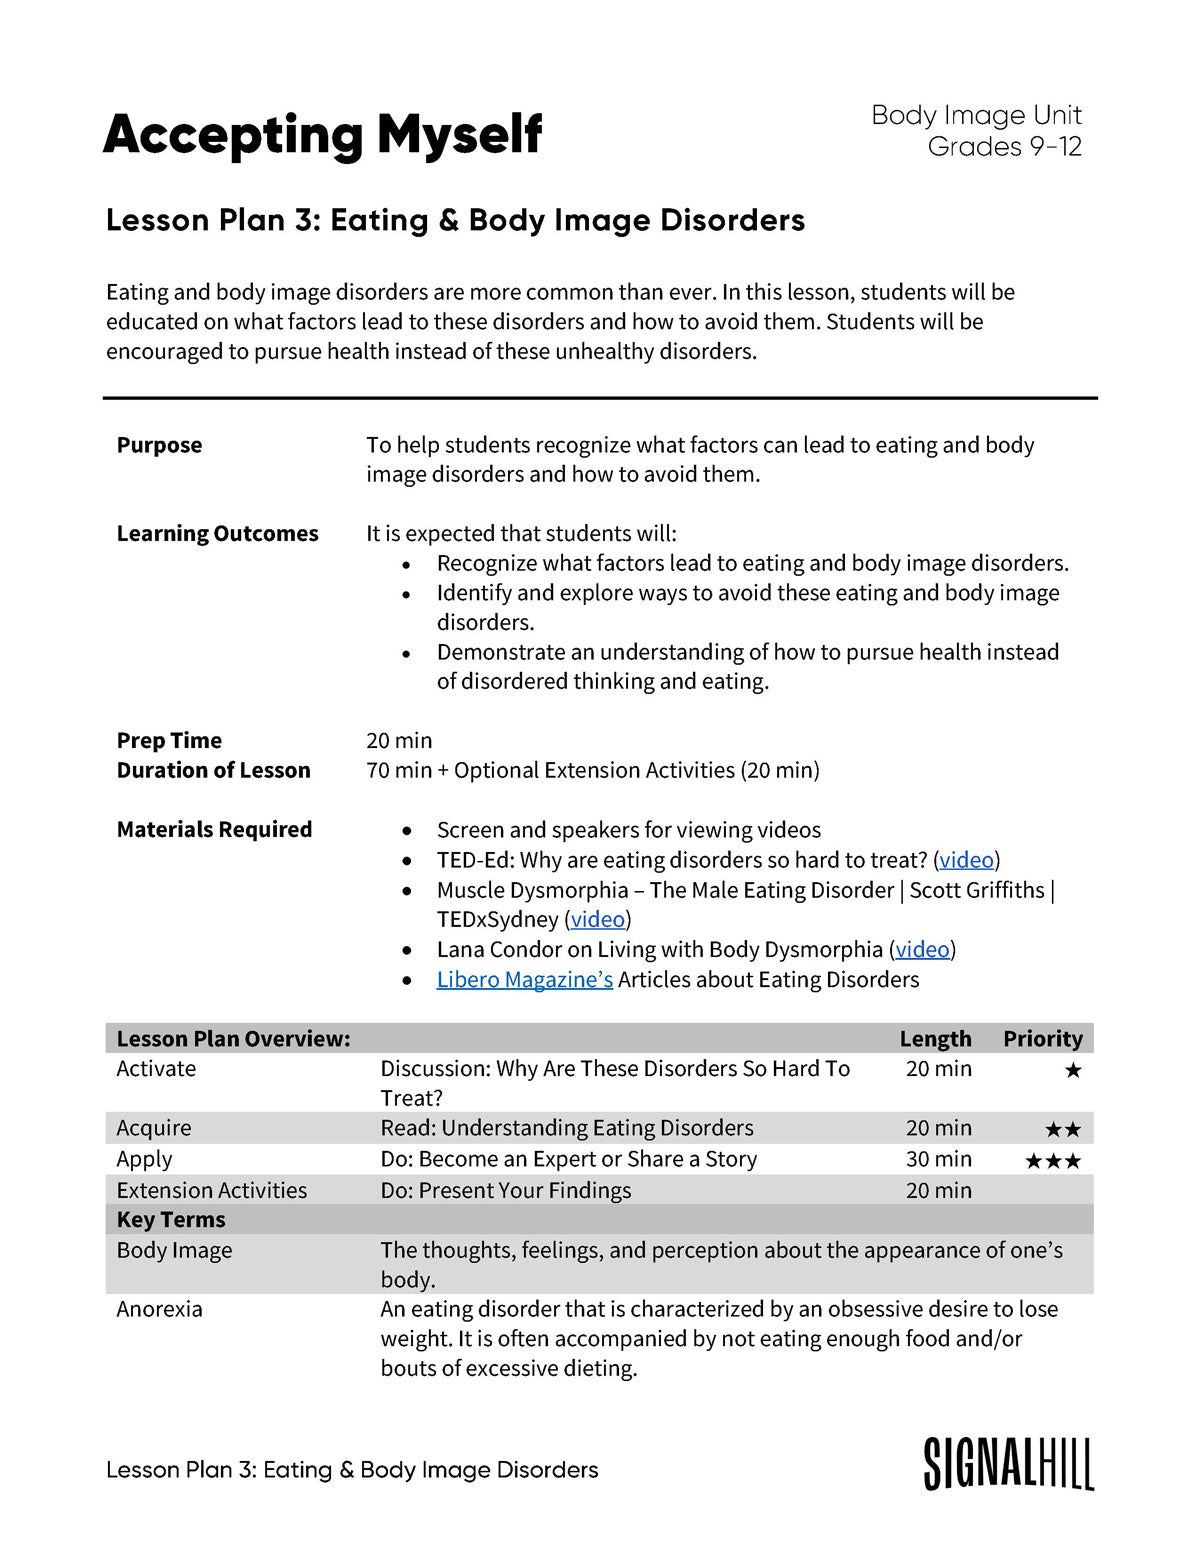 Lesson Plan 3: Eating & Body Image Disorders